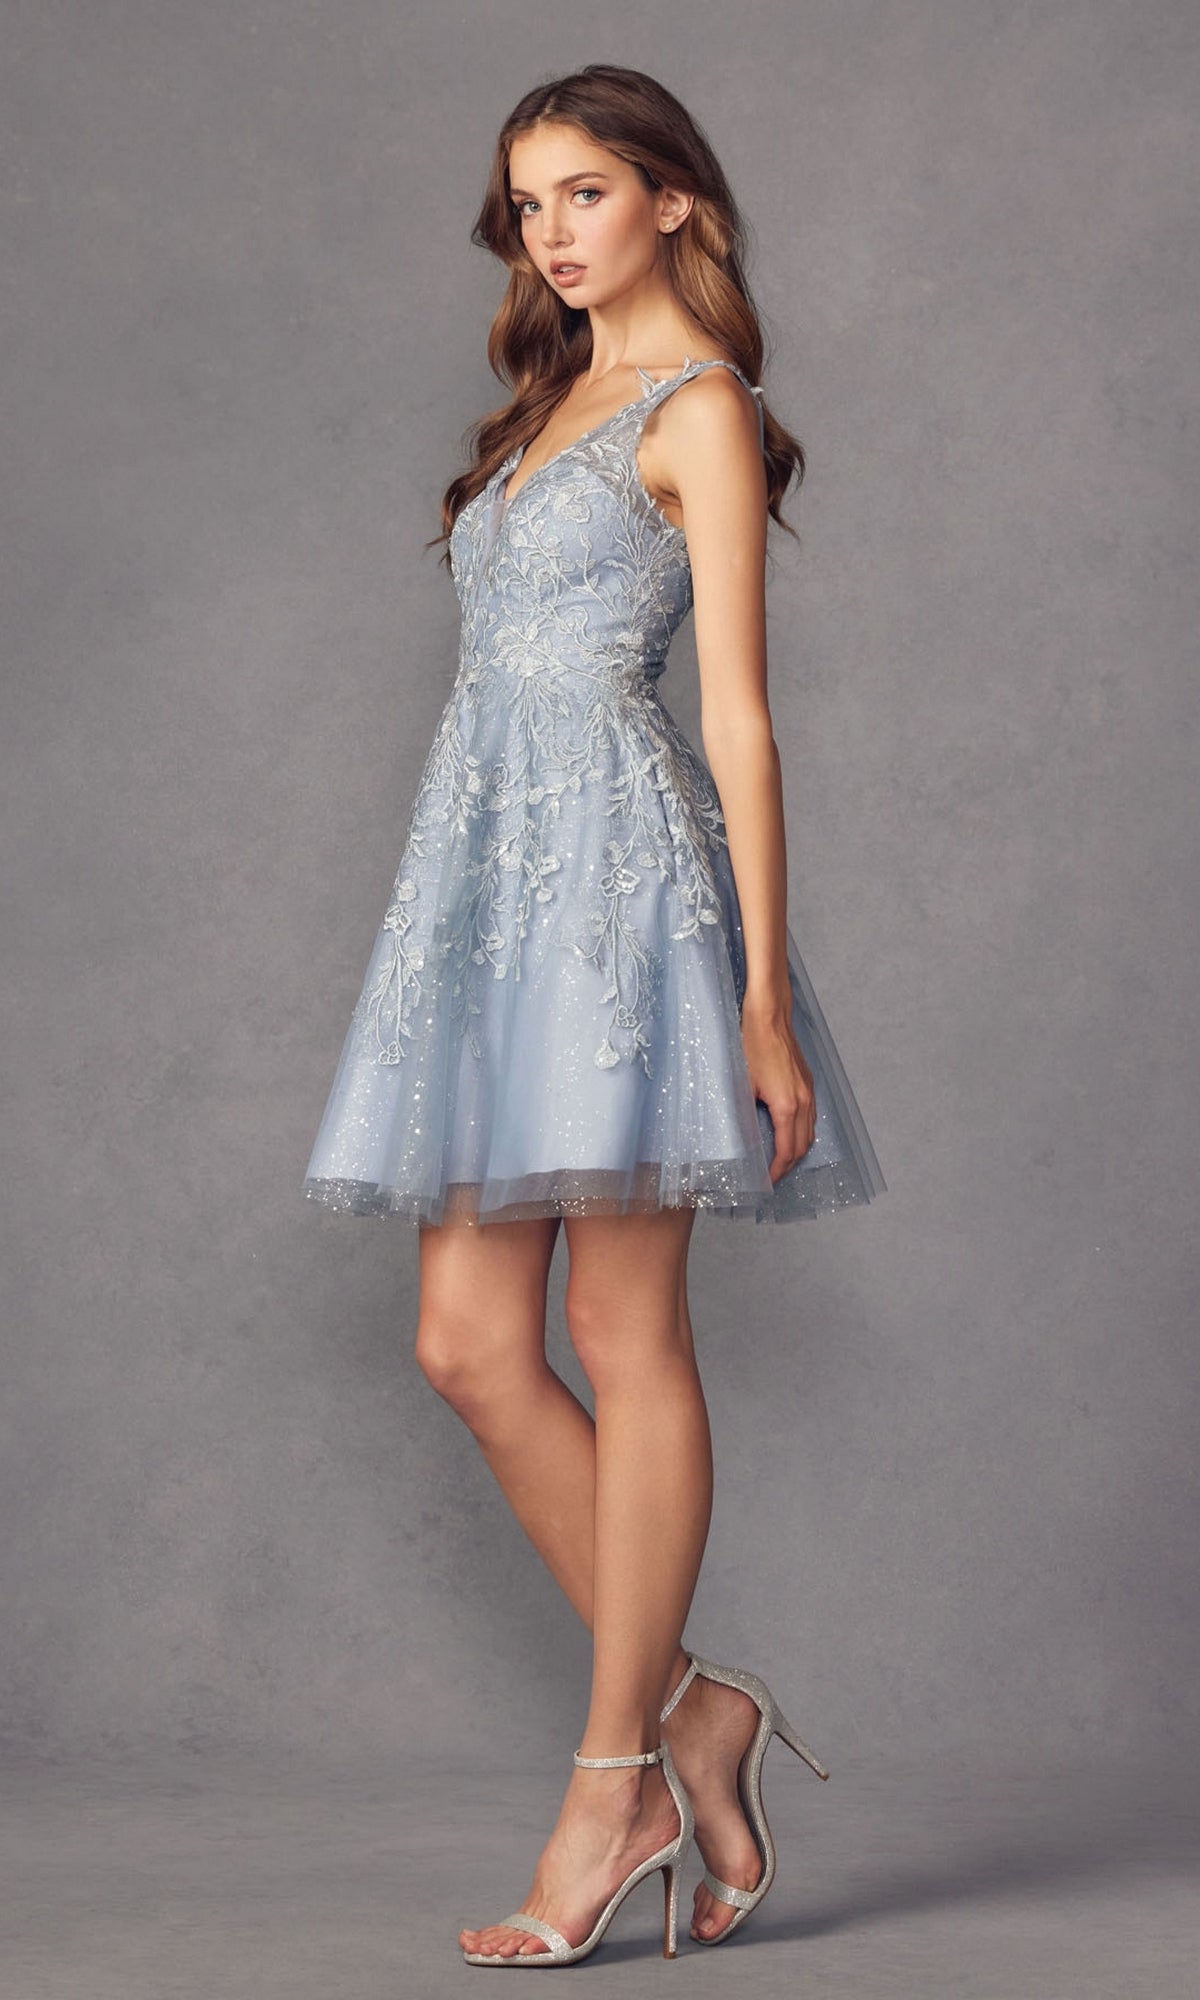 Glitter-Floral A-Line Homecoming Dress - PromGirl